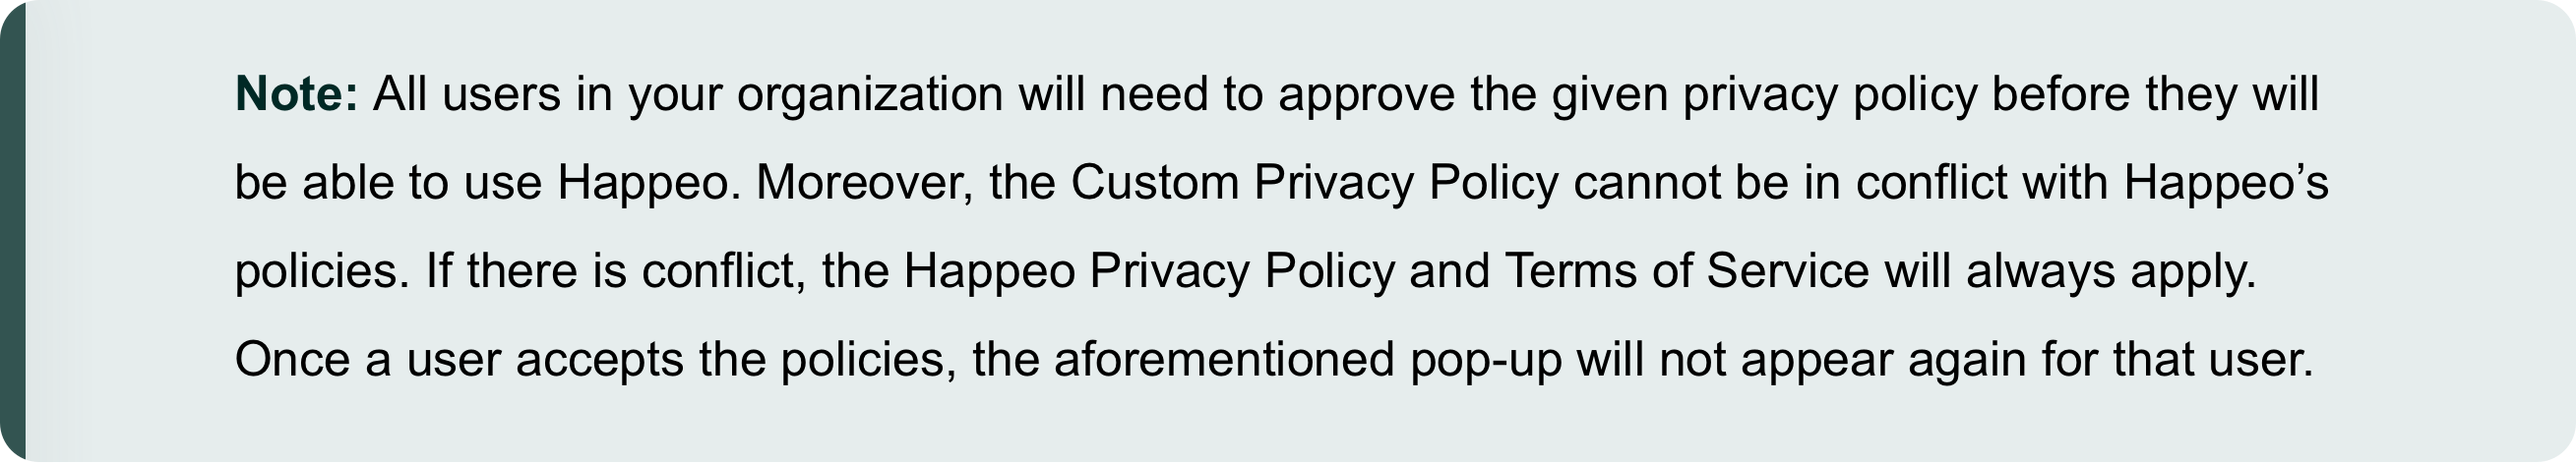 Custom_Privacy_Policy_1.png